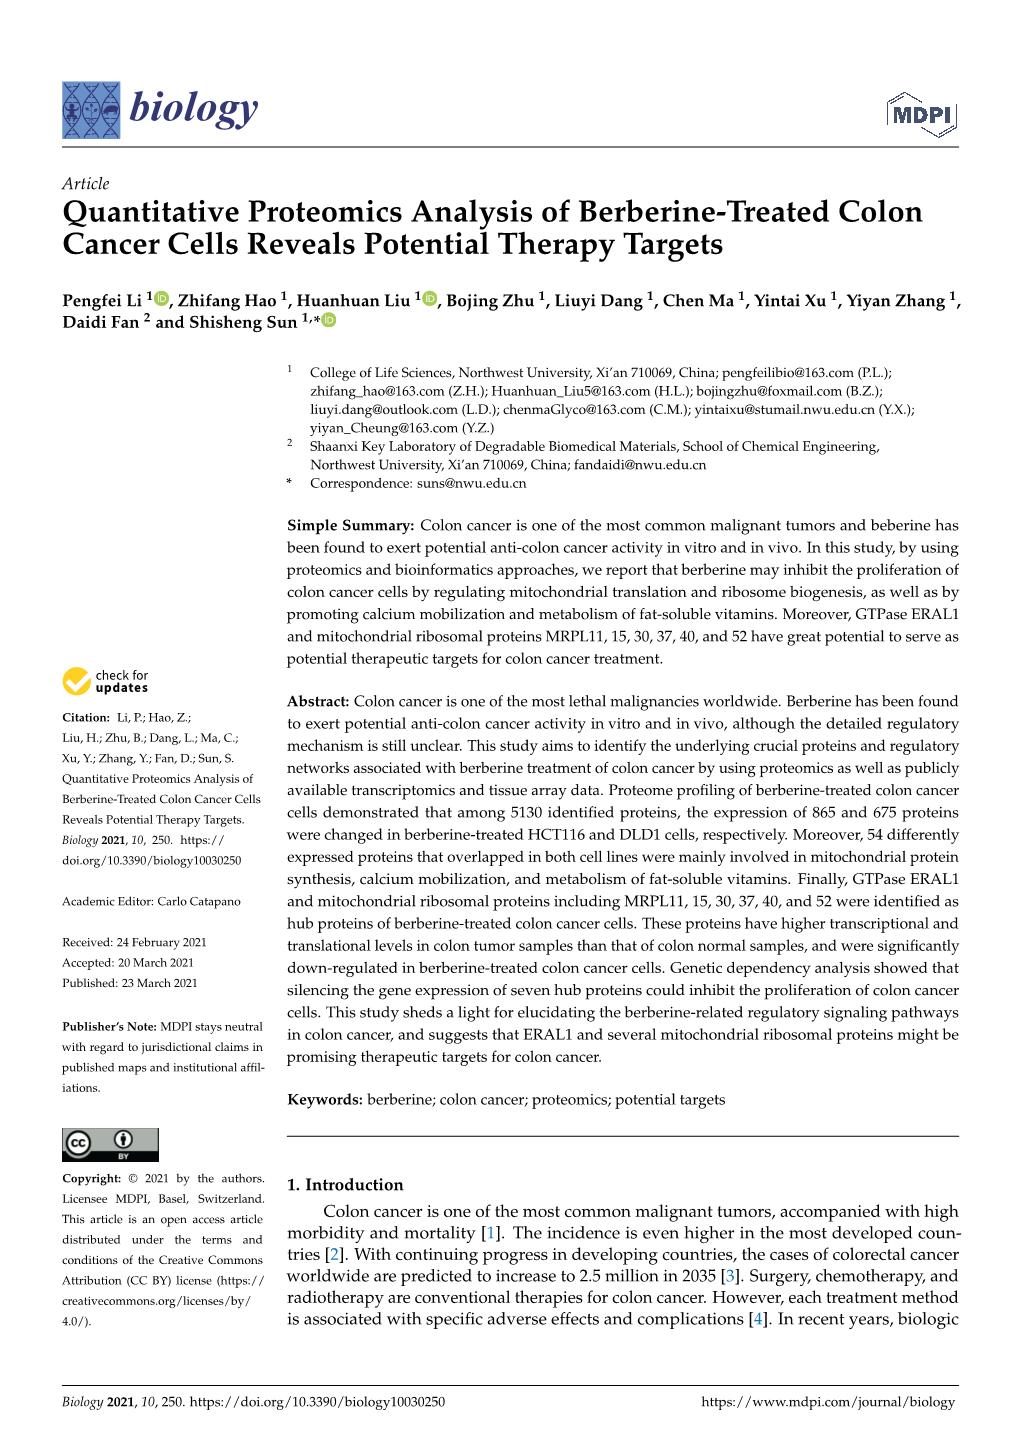 Quantitative Proteomics Analysis of Berberine-Treated Colon Cancer Cells Reveals Potential Therapy Targets